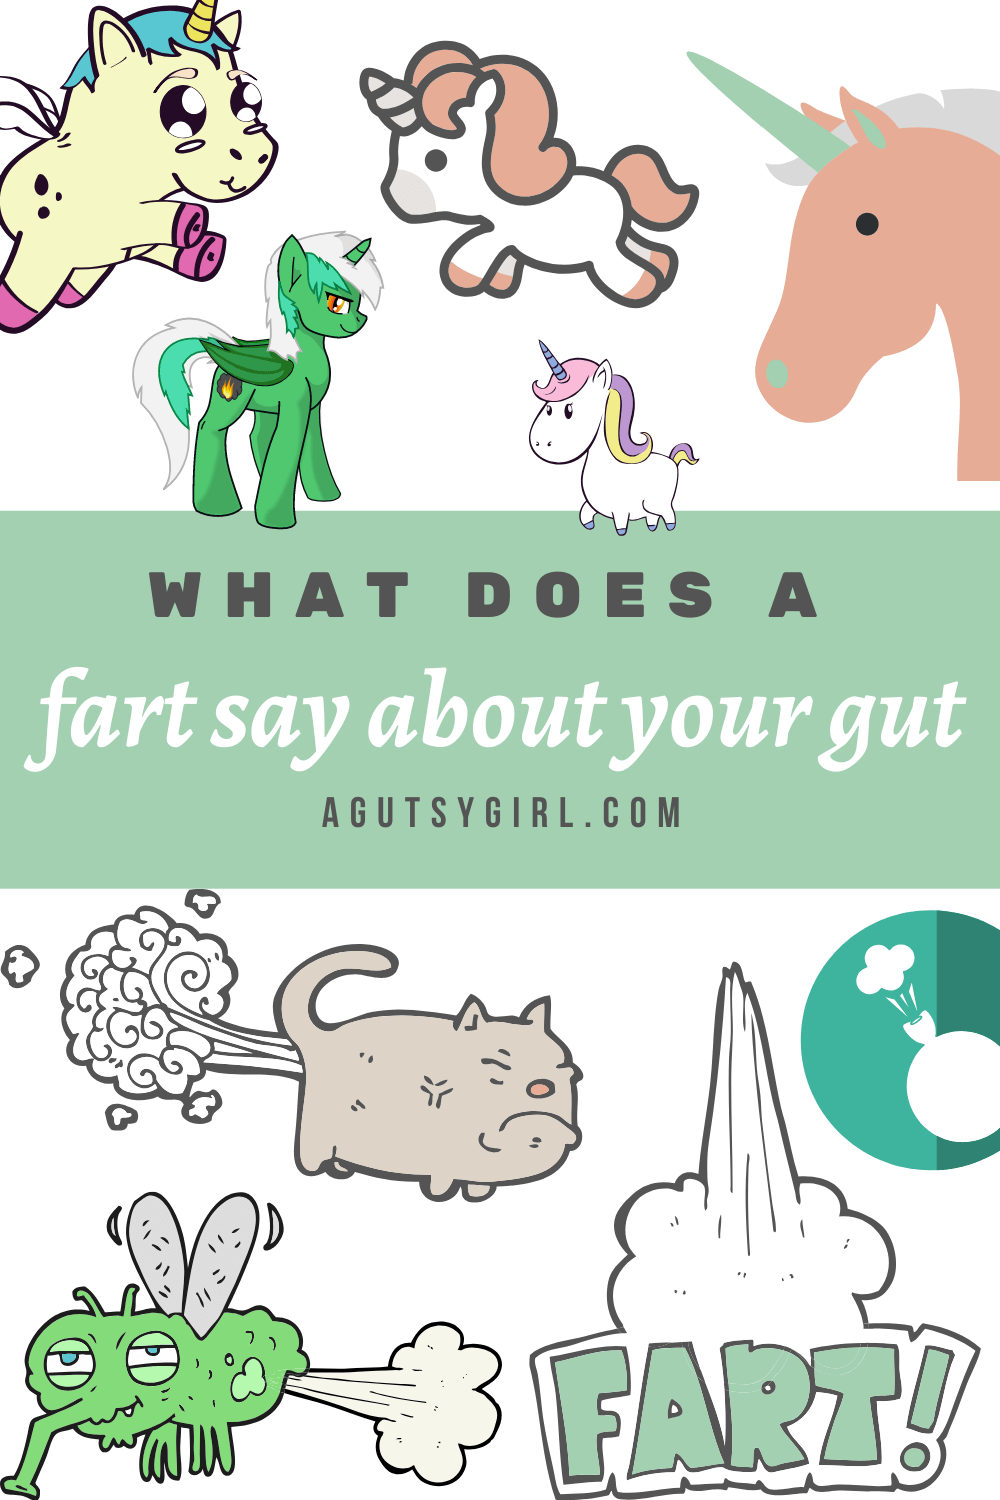 What Does a Fart Say About Your Gut? agutsygirl.com #fart #farting #guthealth #gut